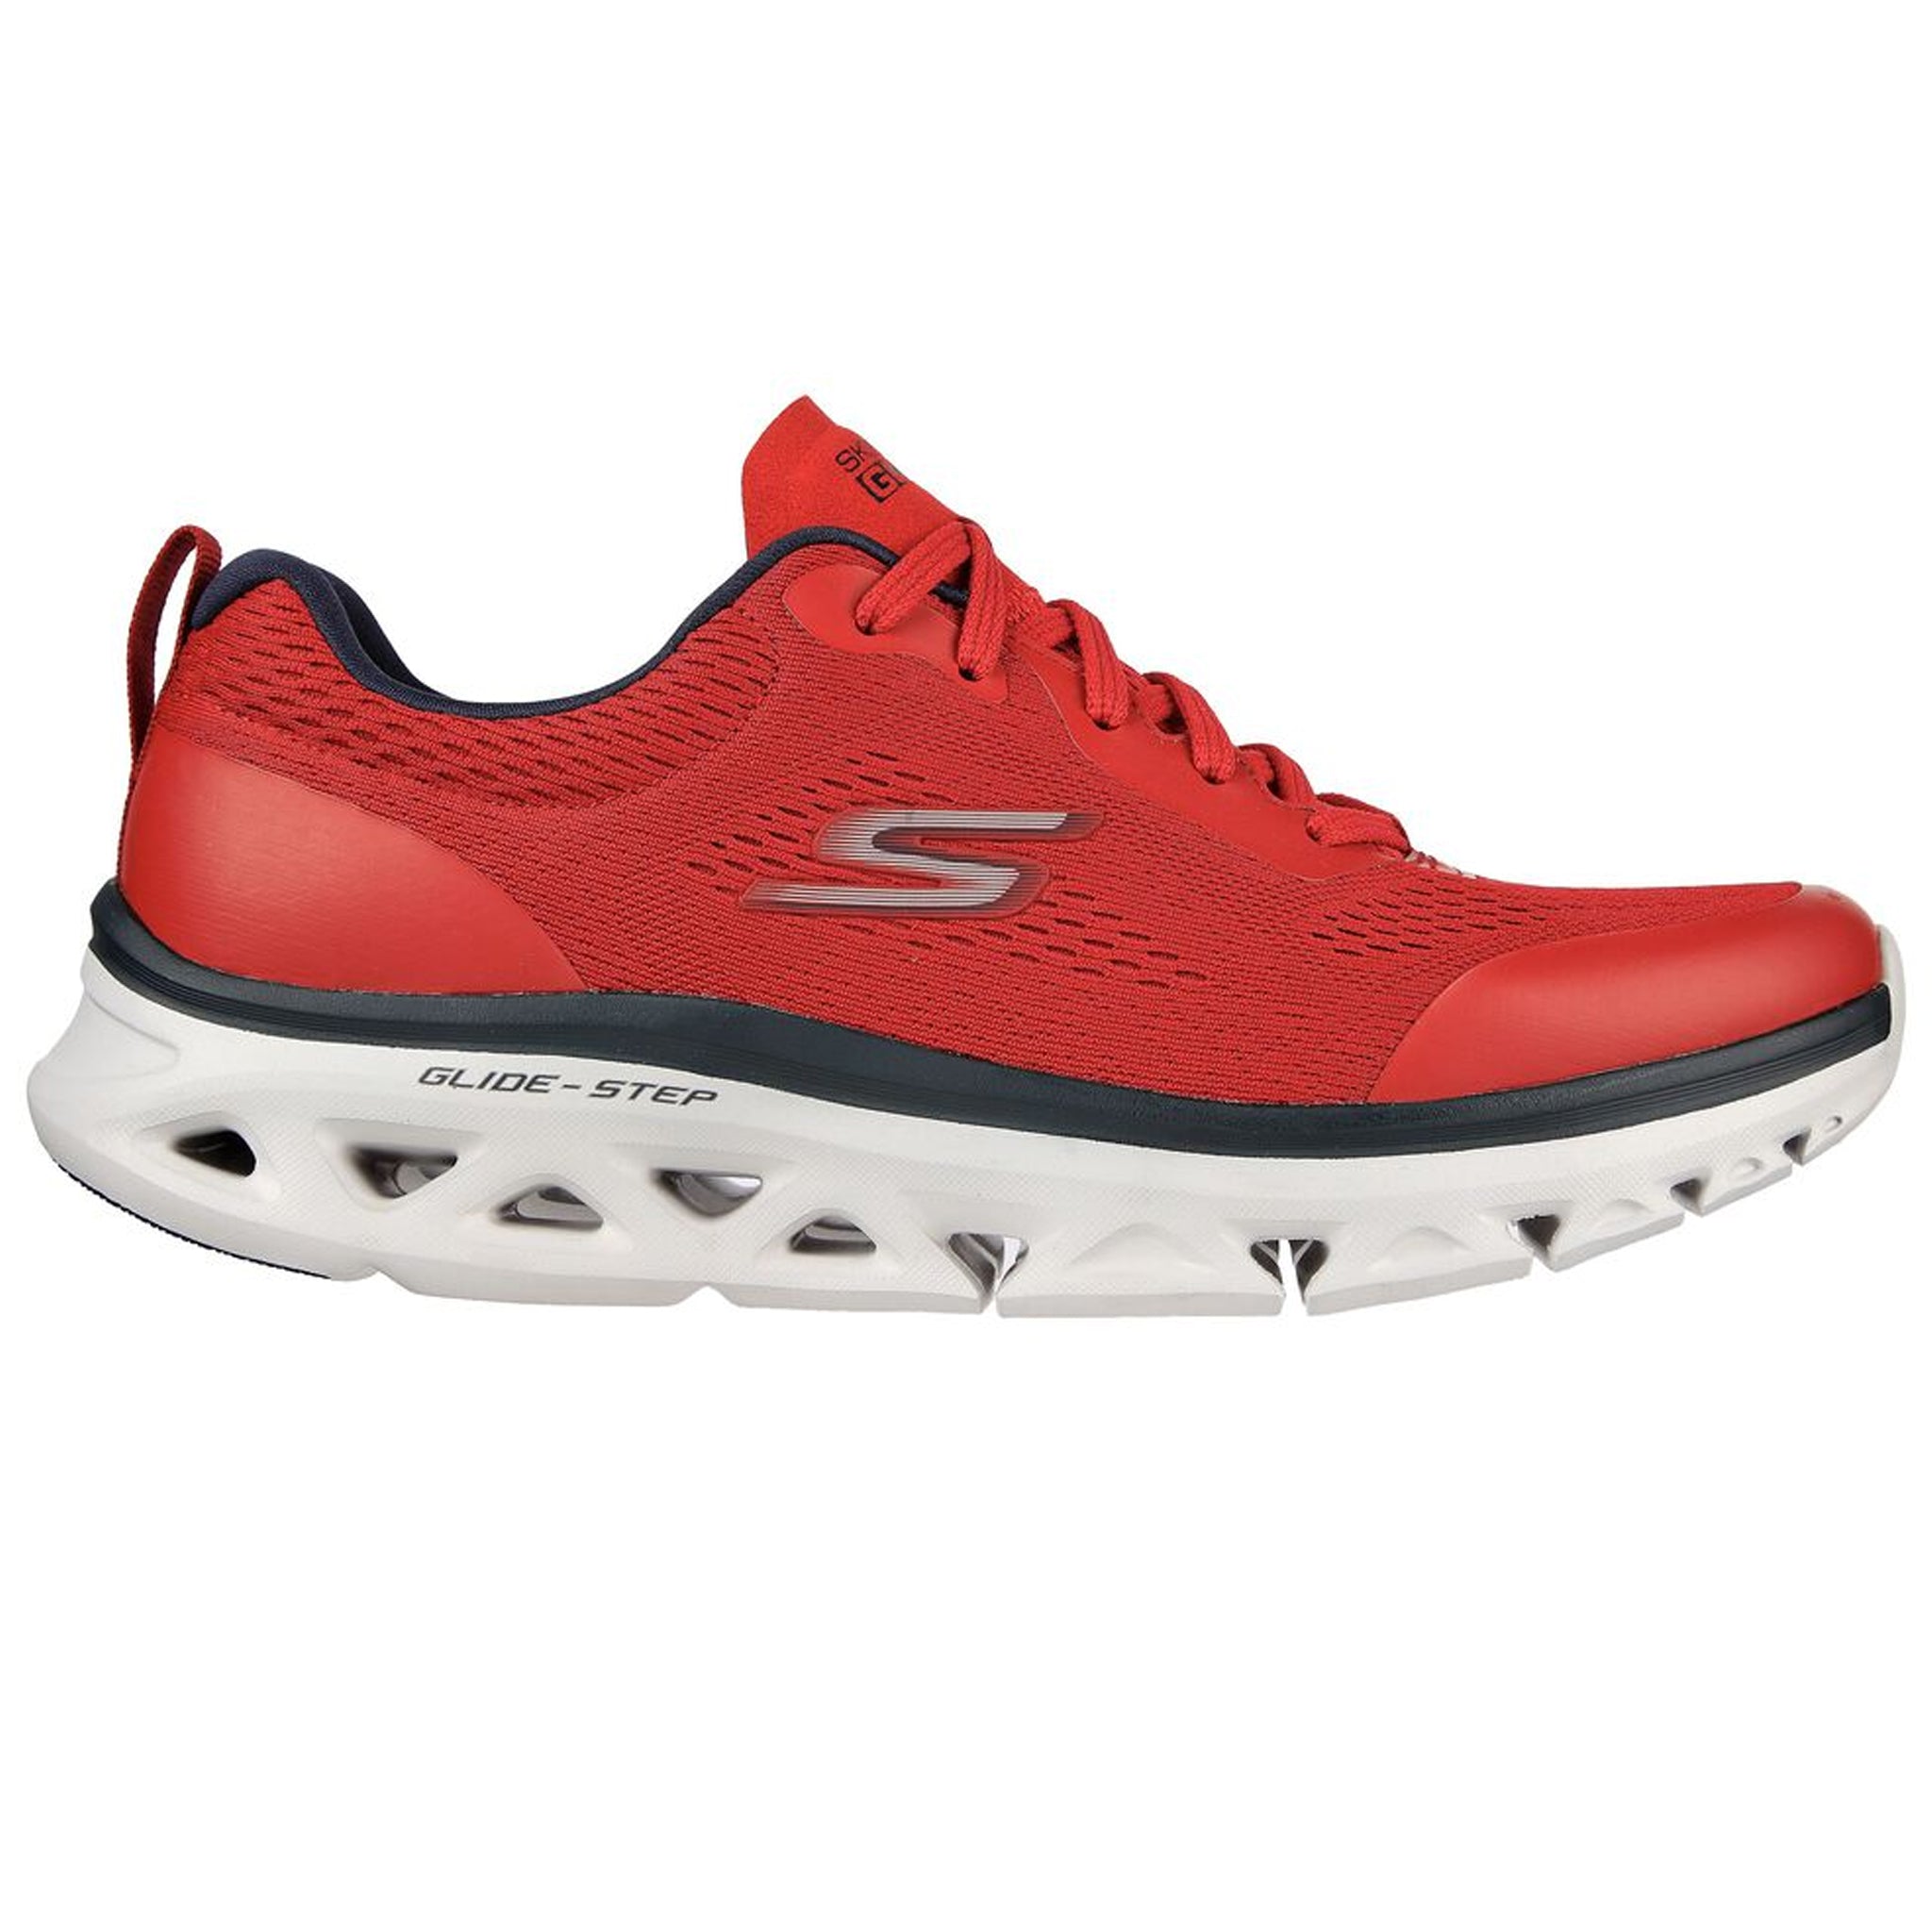 Skechers Men's 220503 GO Glide-Step Flex Running Shoes That Shoe and More